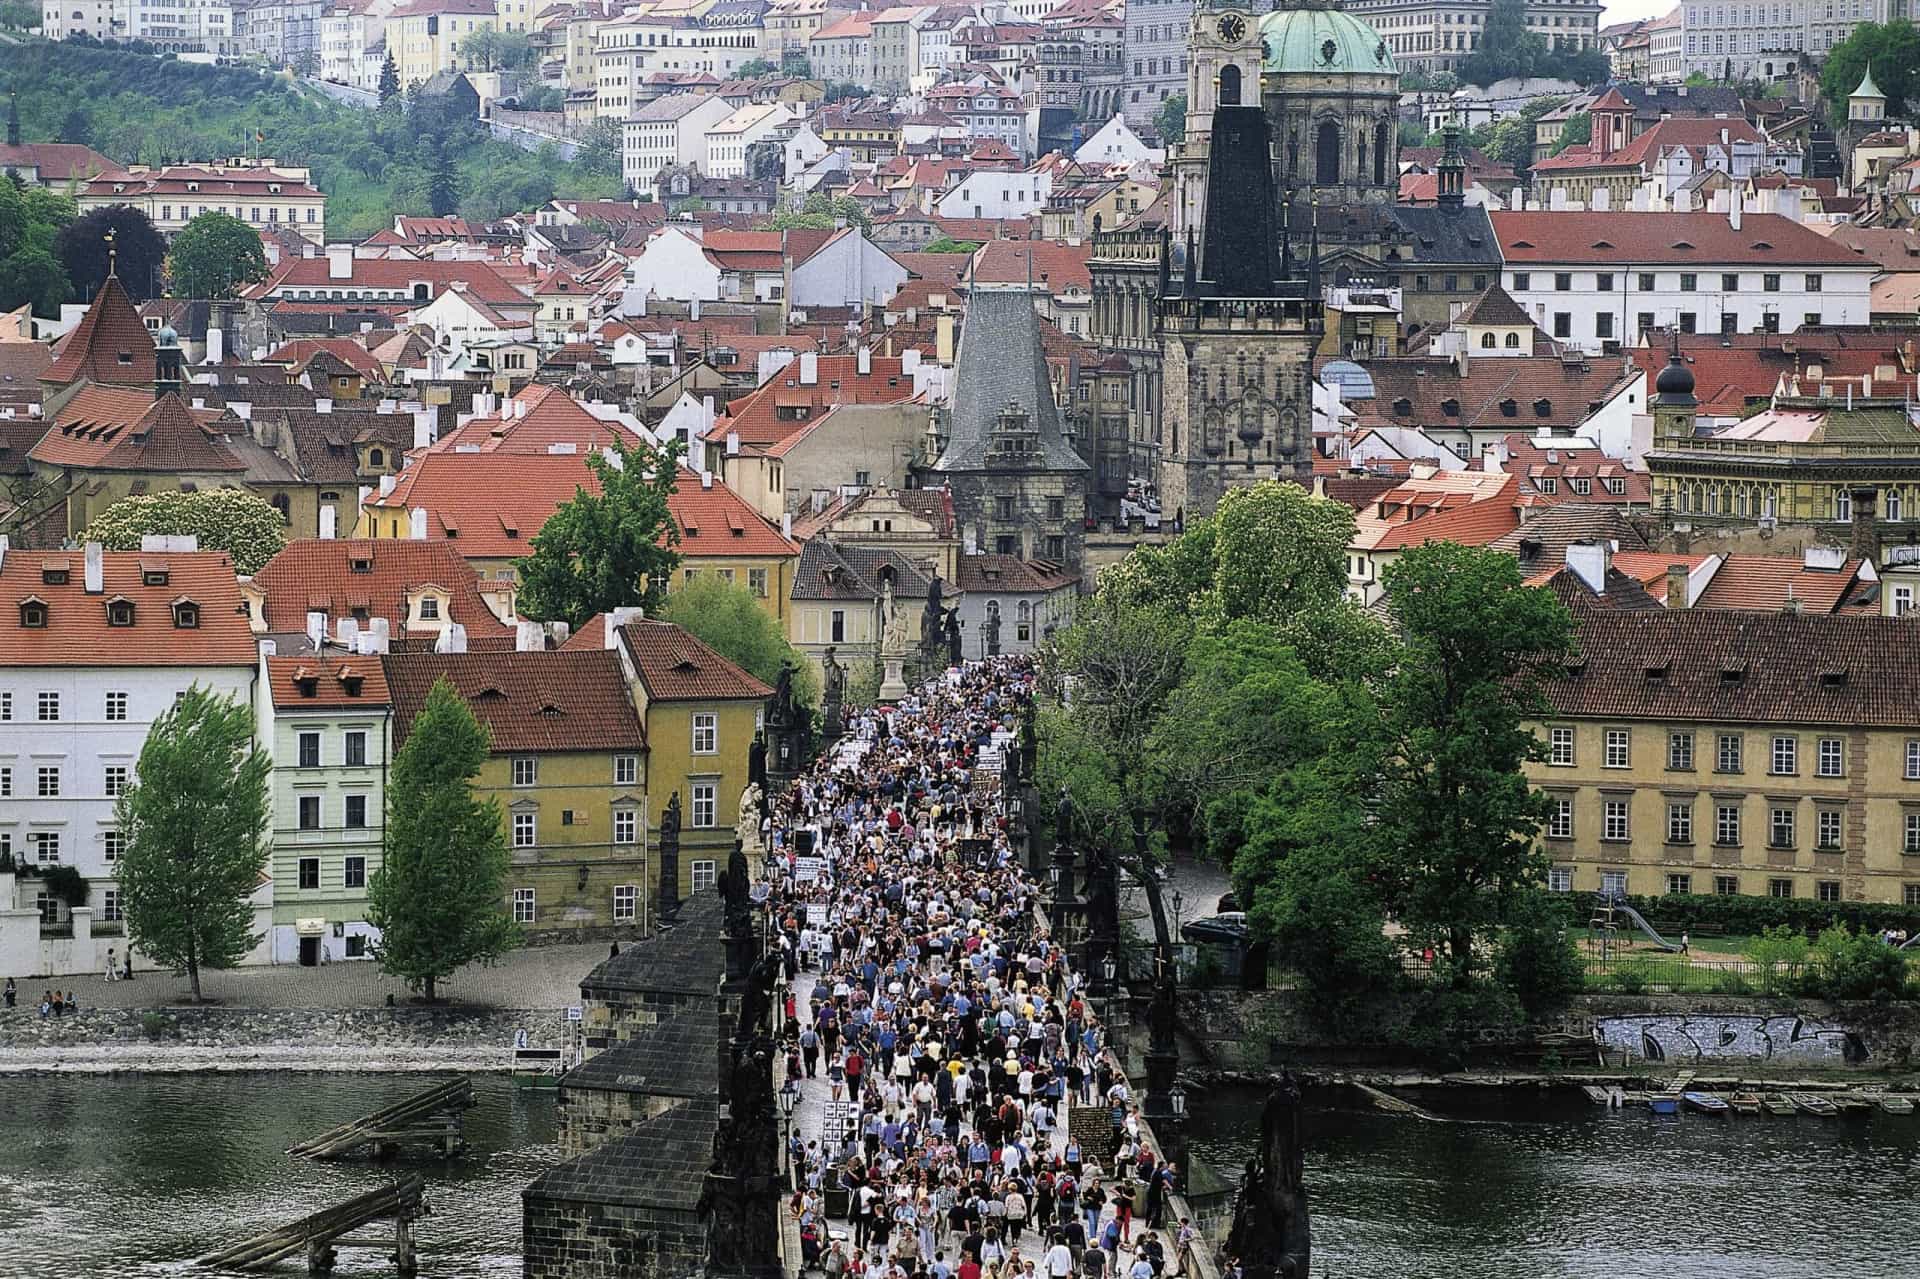 <p>Tourists flocked to Prague in the year Czechoslovakia dissolved. Perhaps they were scared things would change dramatically after the split and wanted to visit the city in all its glory. </p>